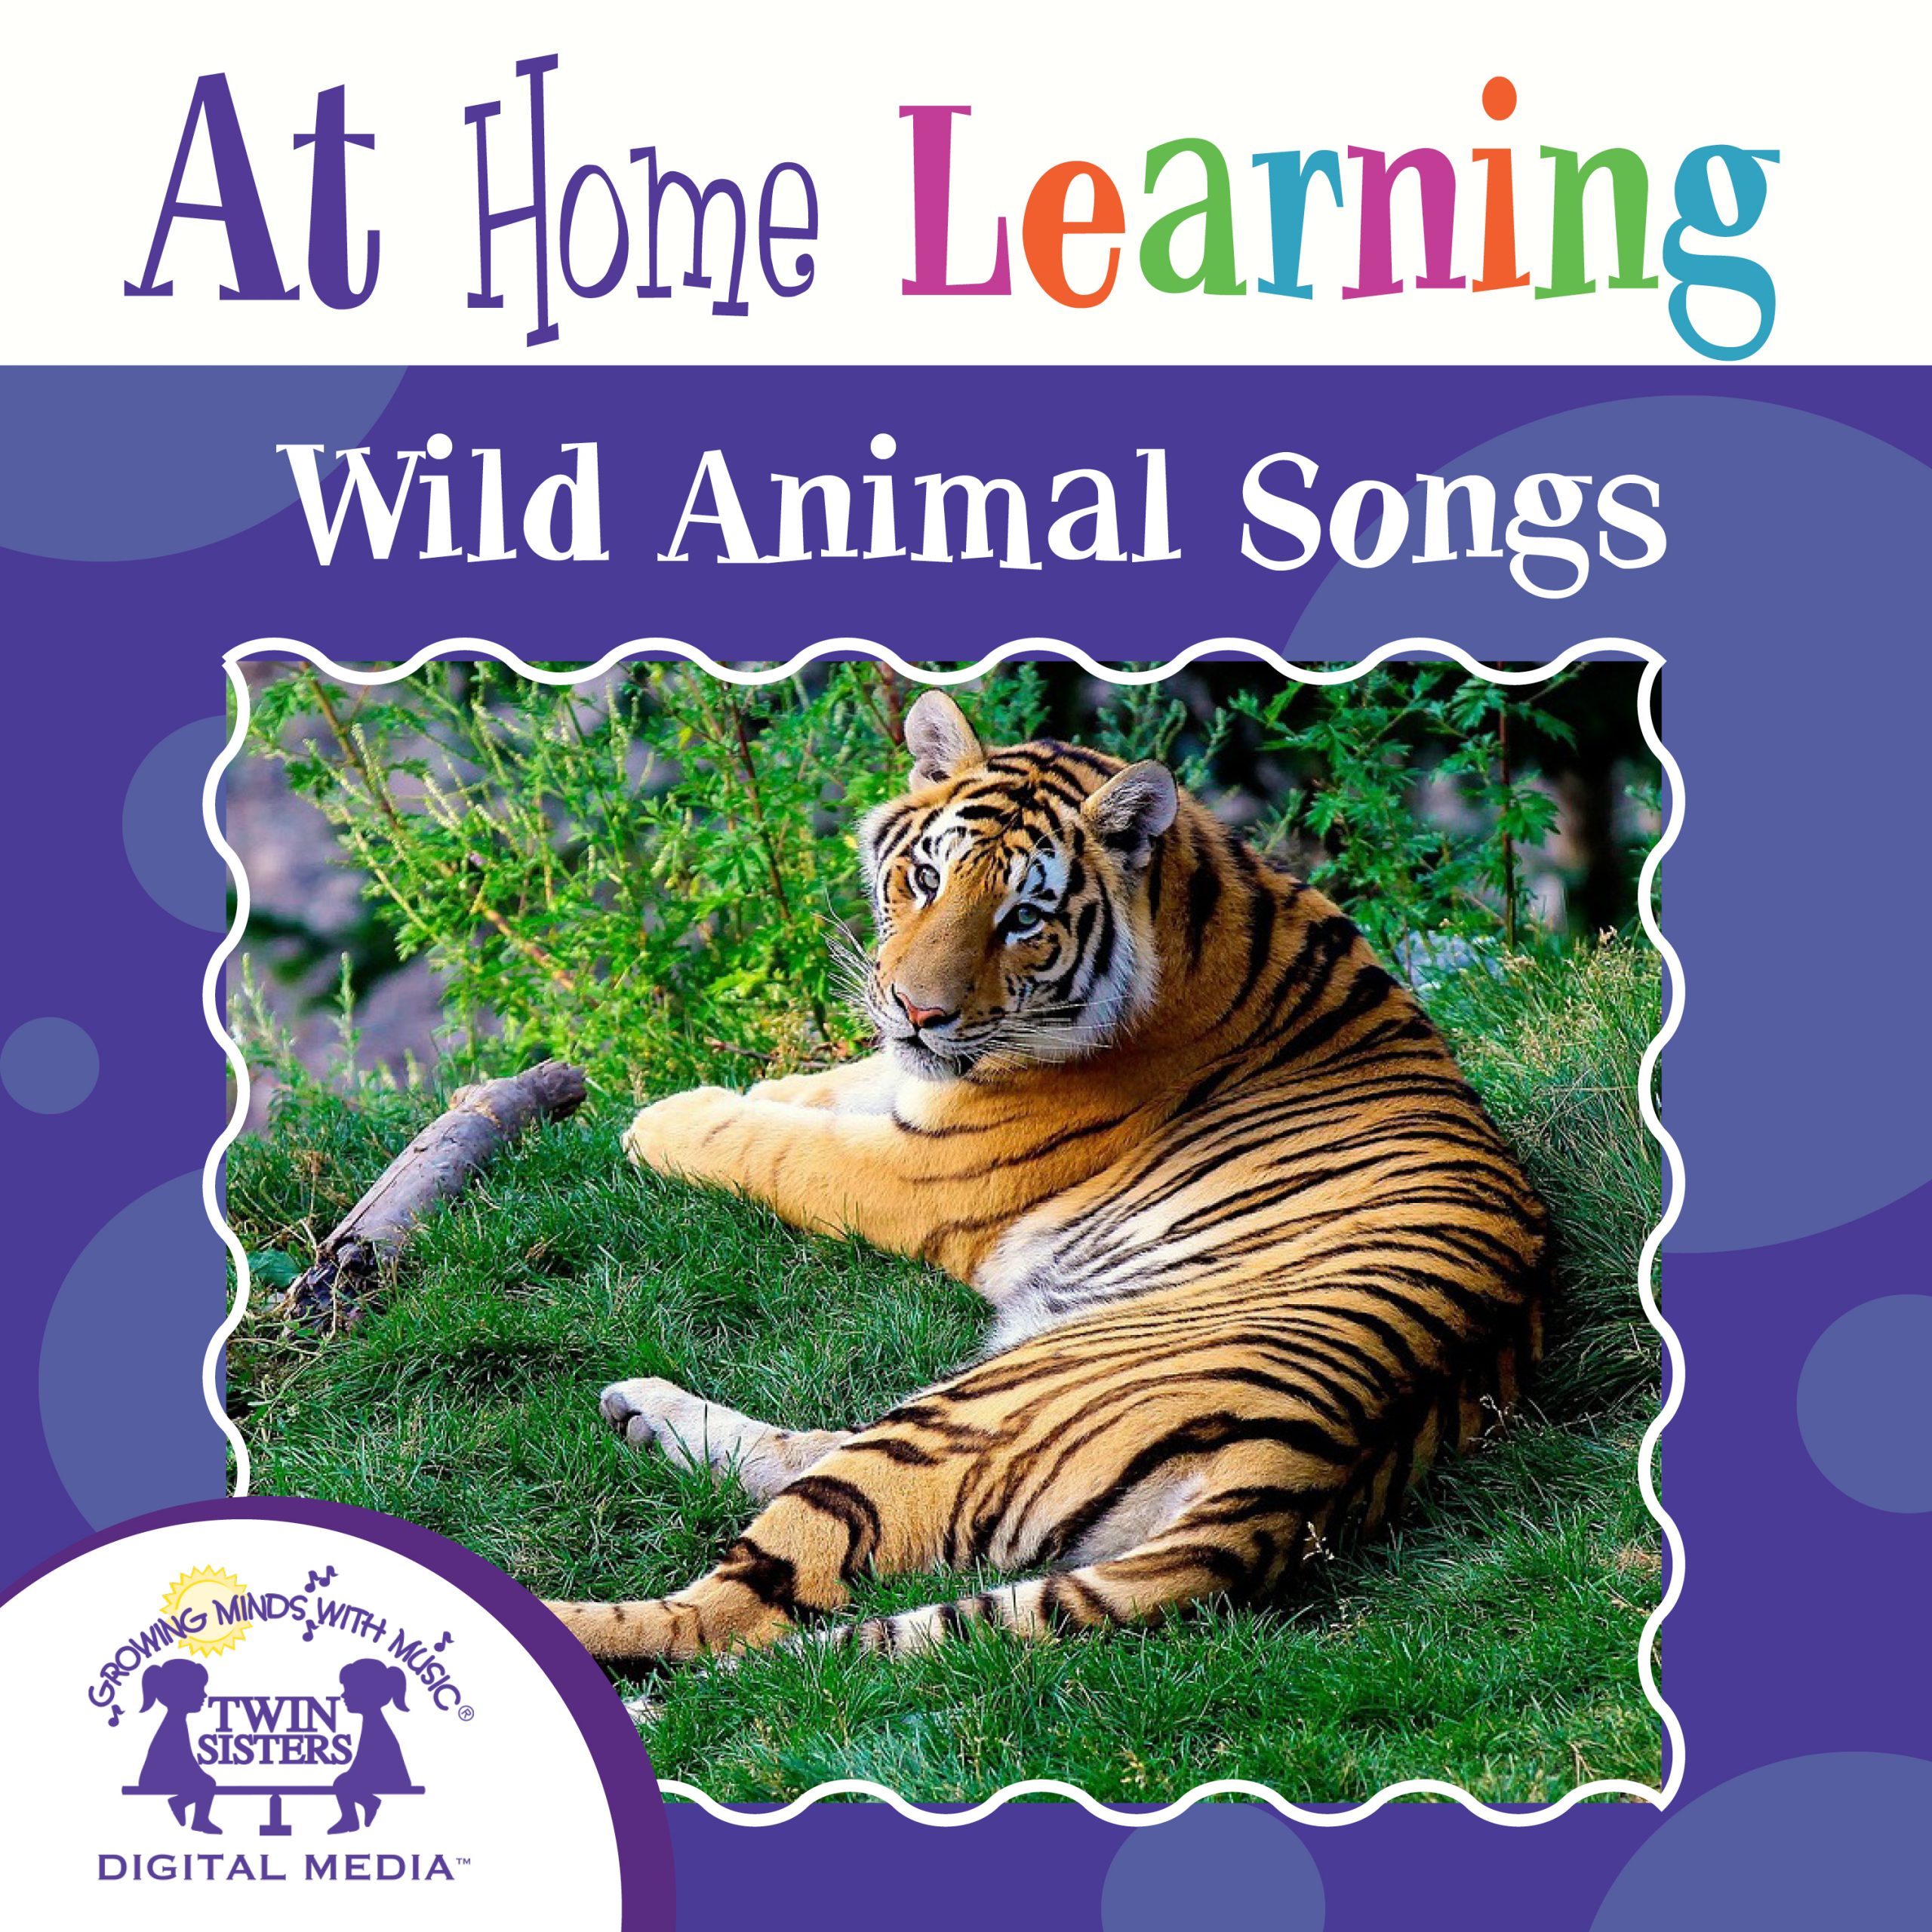 At Home Learning Wild Animal Songs | Twin Sisters